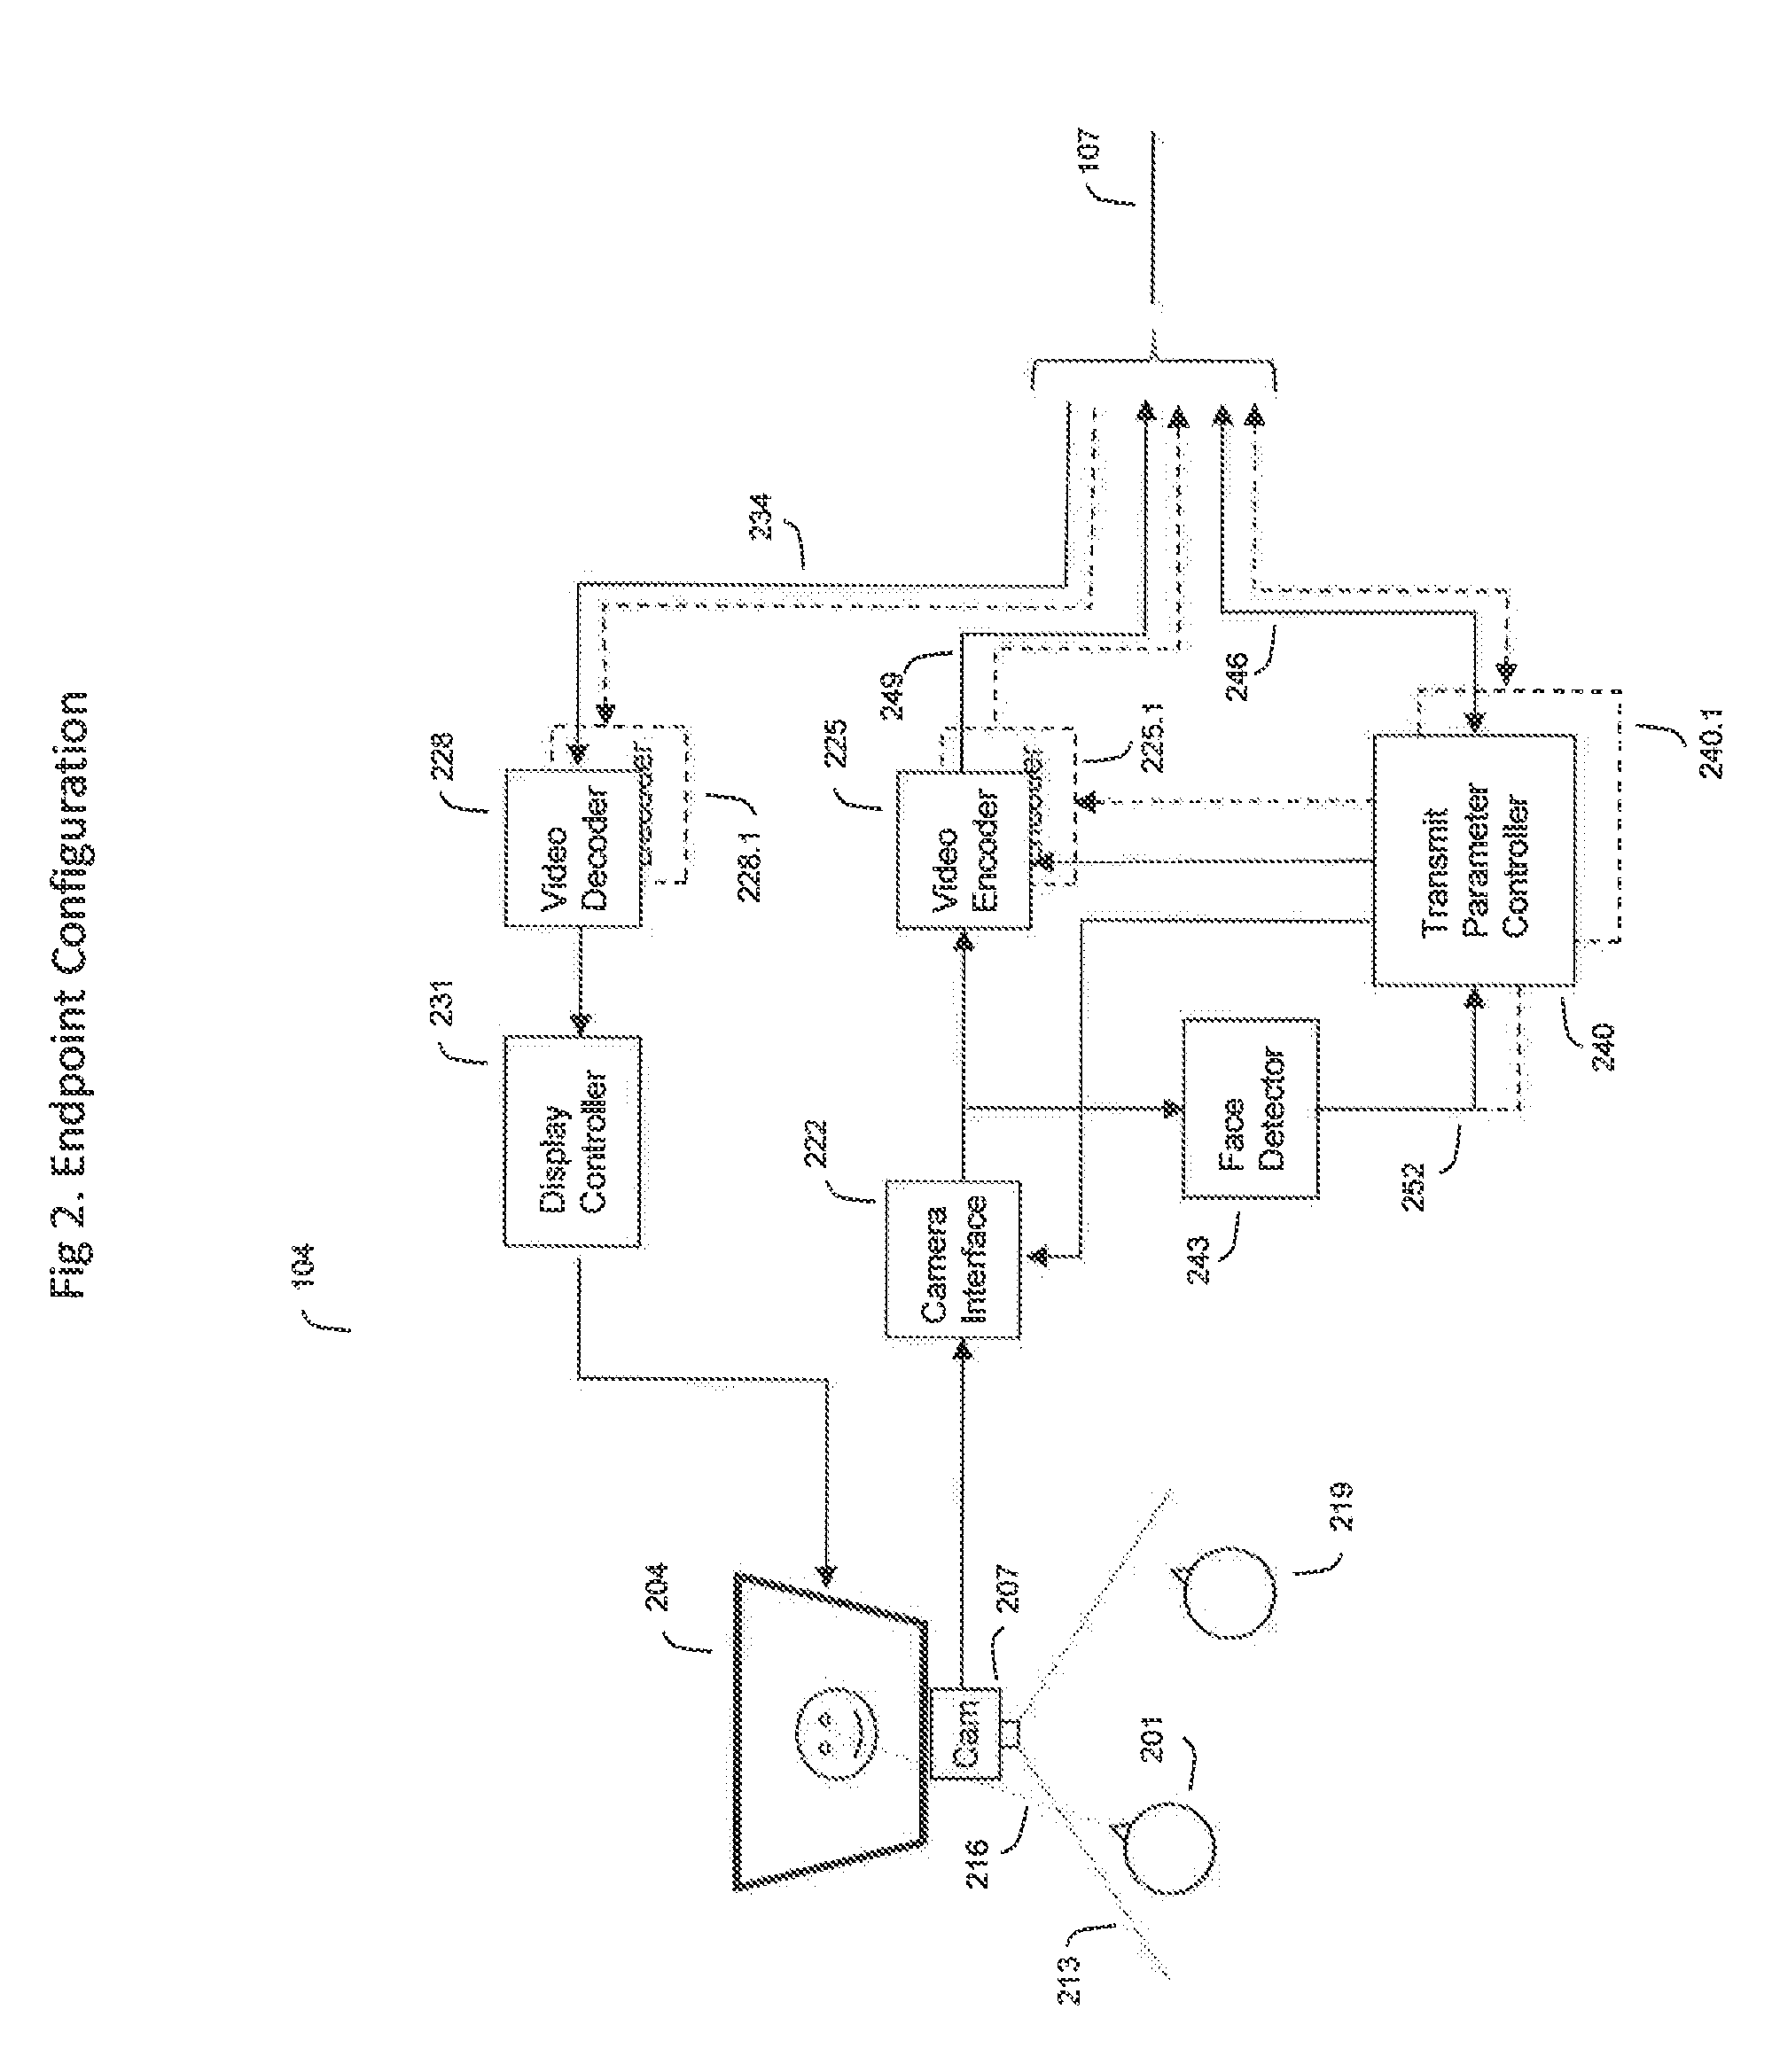 Method of controlling bandwidth in an always on video conferencing system